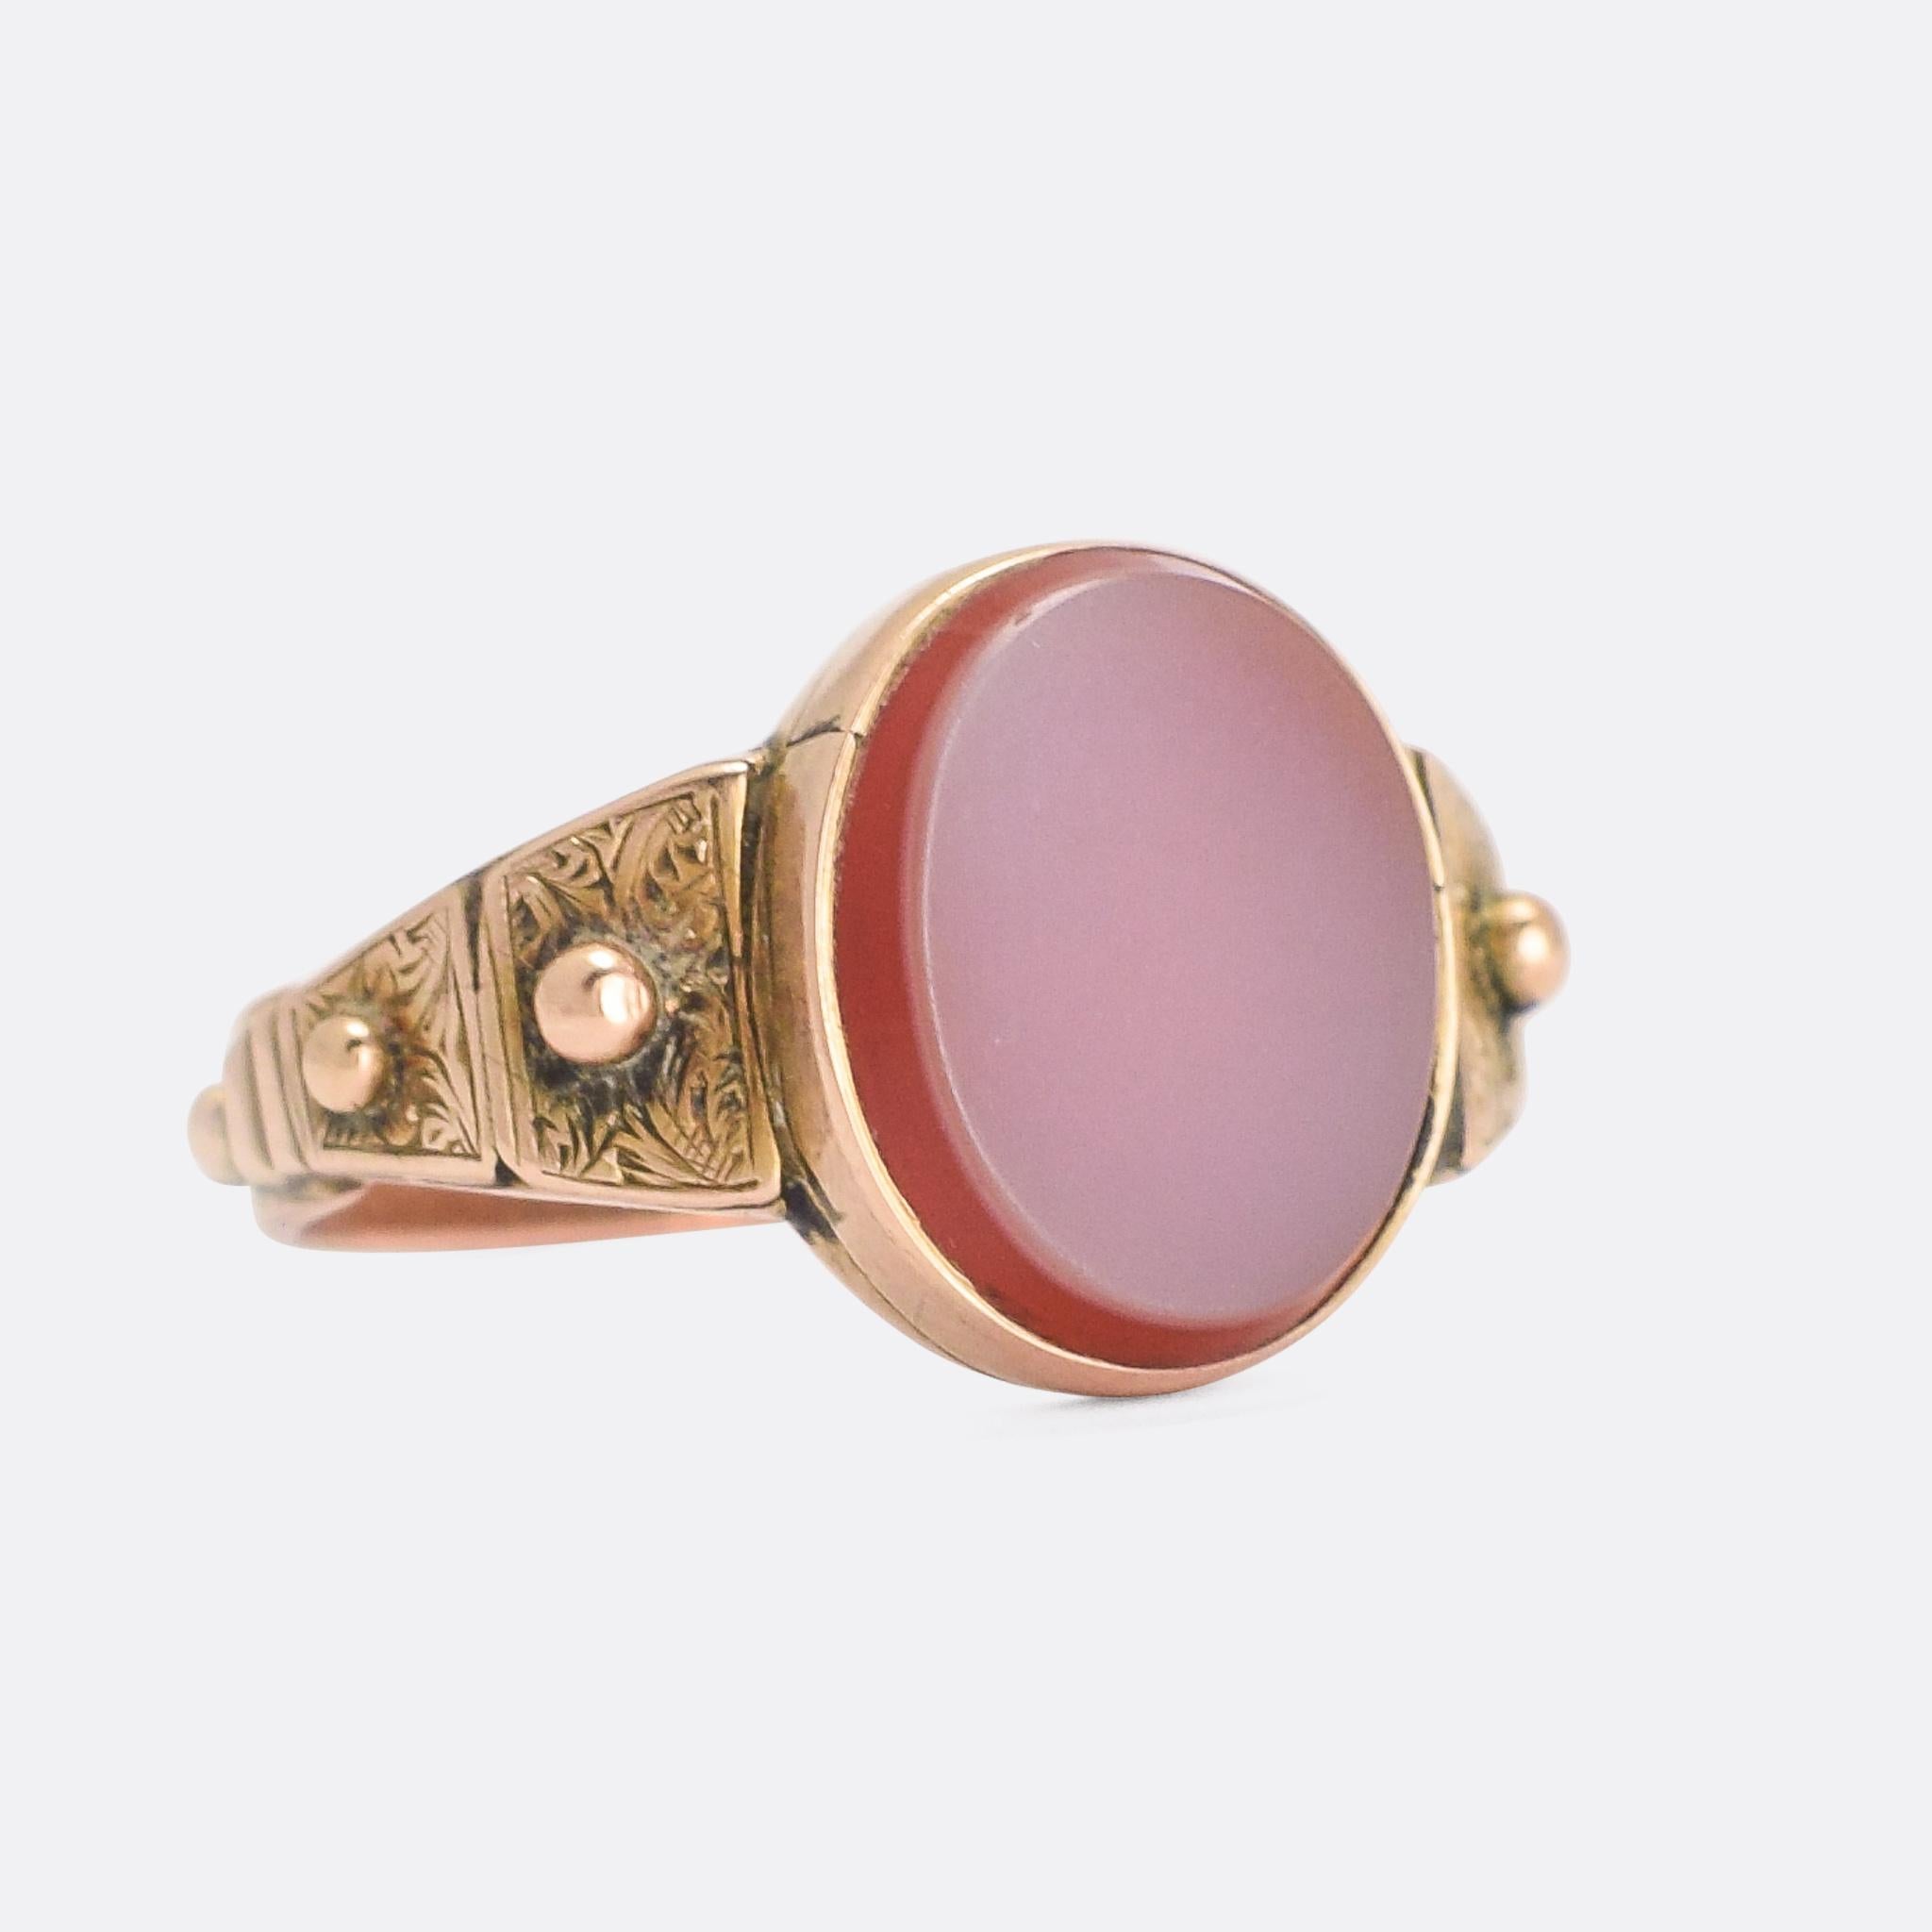 An awesome antique signet / poison ring.... but so much more. The head is hinged, opening up to reveal a secret compartment behind the oval sardonyx panel. It's also a Rosary ring, with studs all around the band designed to be used as a physical